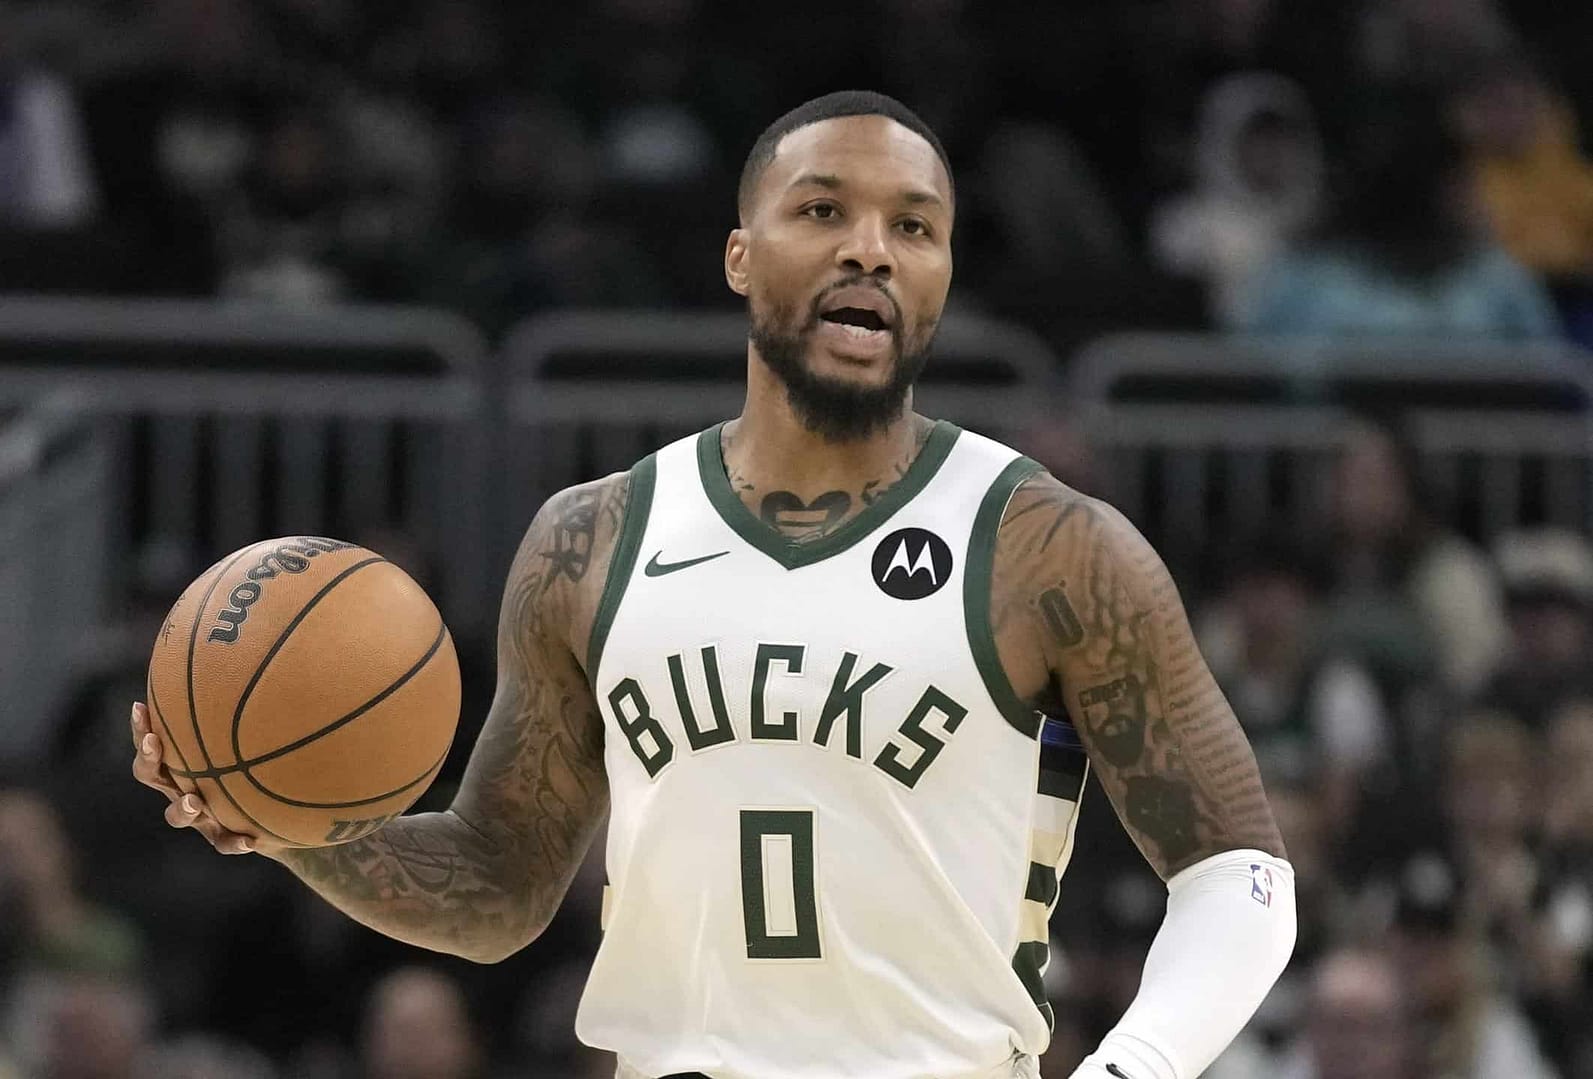 Our expert dives into how to bet Bucks-Pacers Game 6 and are Giannis Antetokounmpo and Damian Lillard playing tonight...